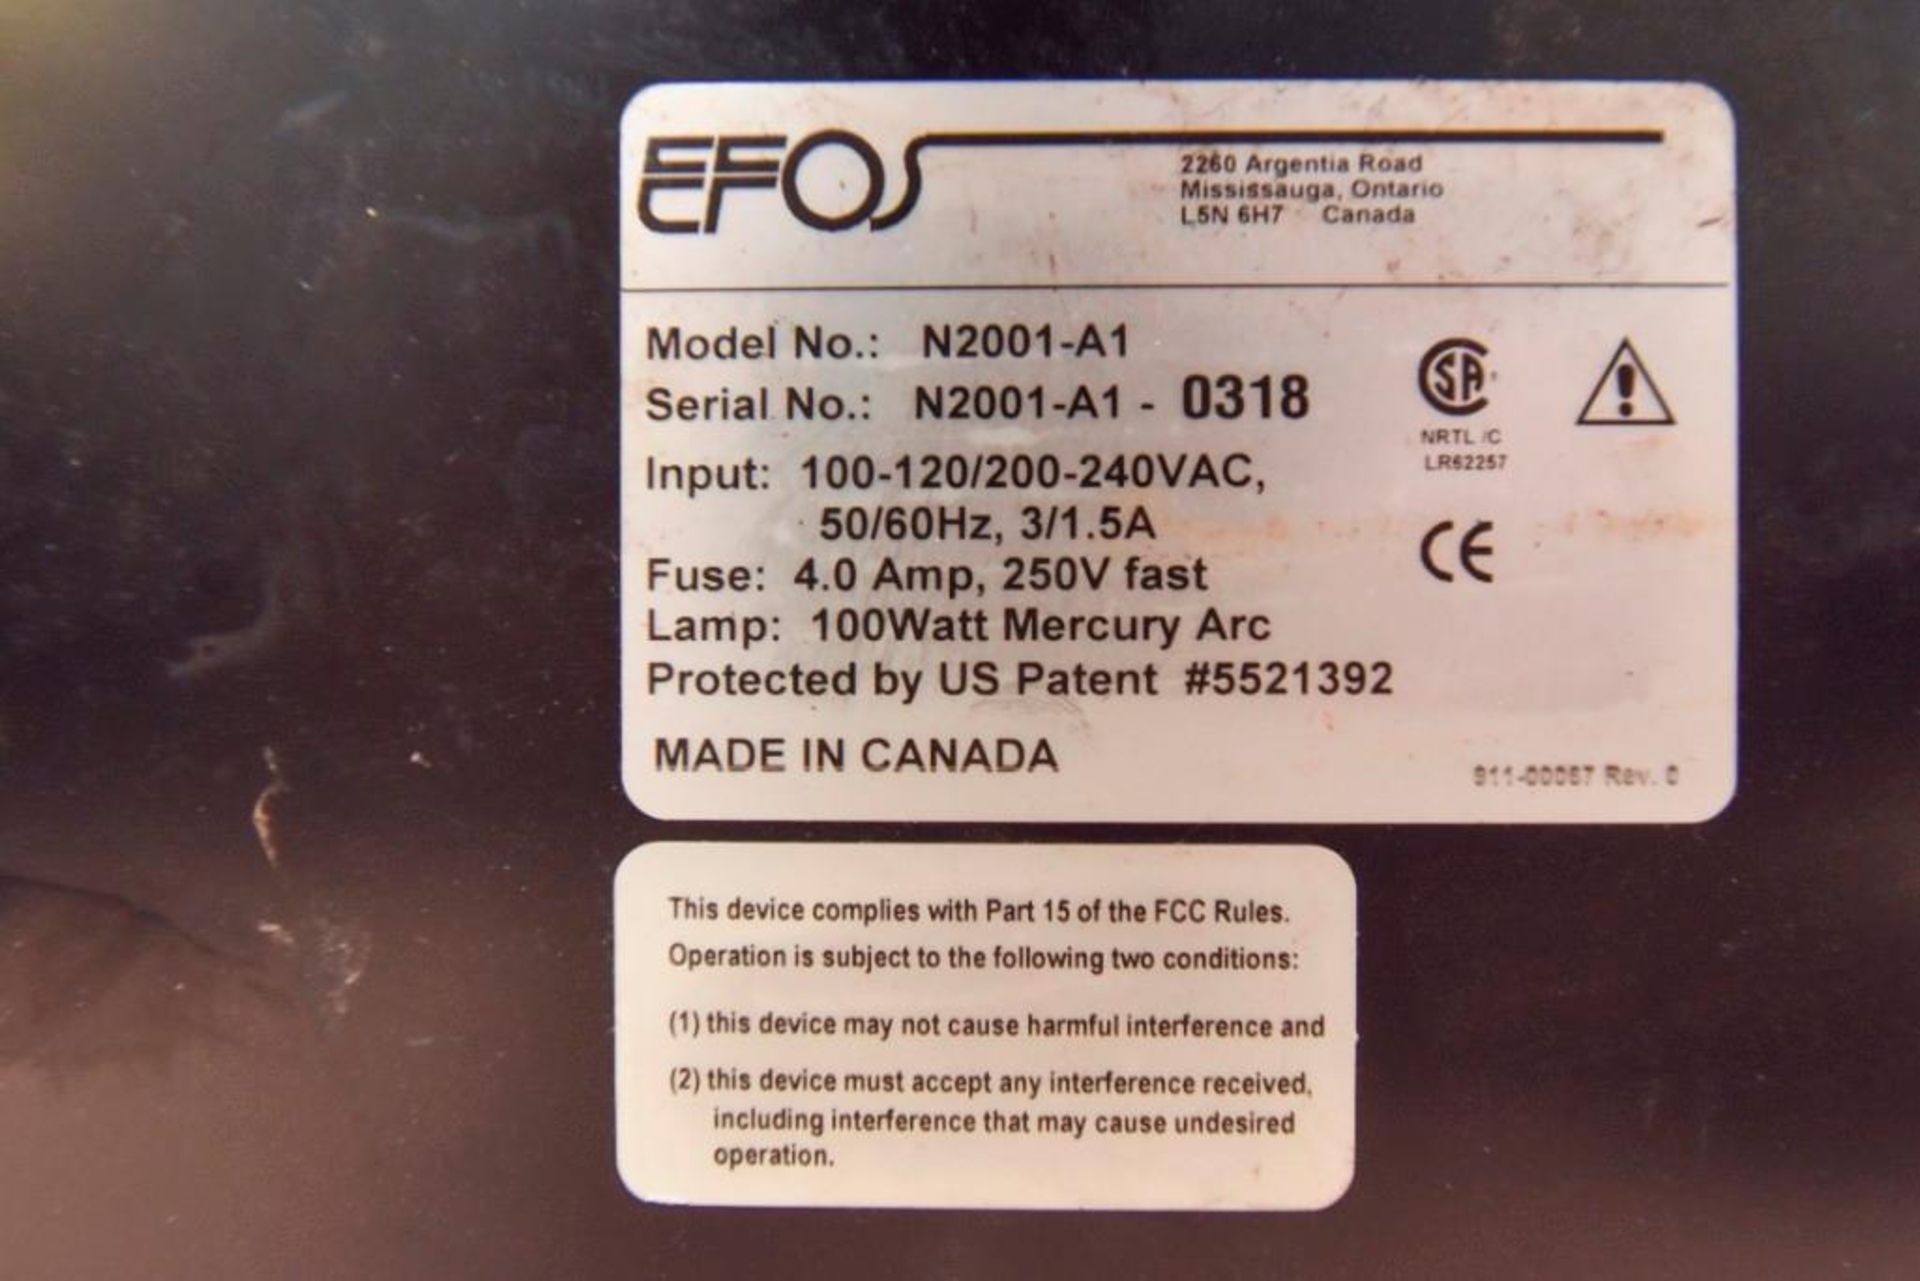 EFOS Novacure UV Spot Curing System N2001-A1 - Image 4 of 4